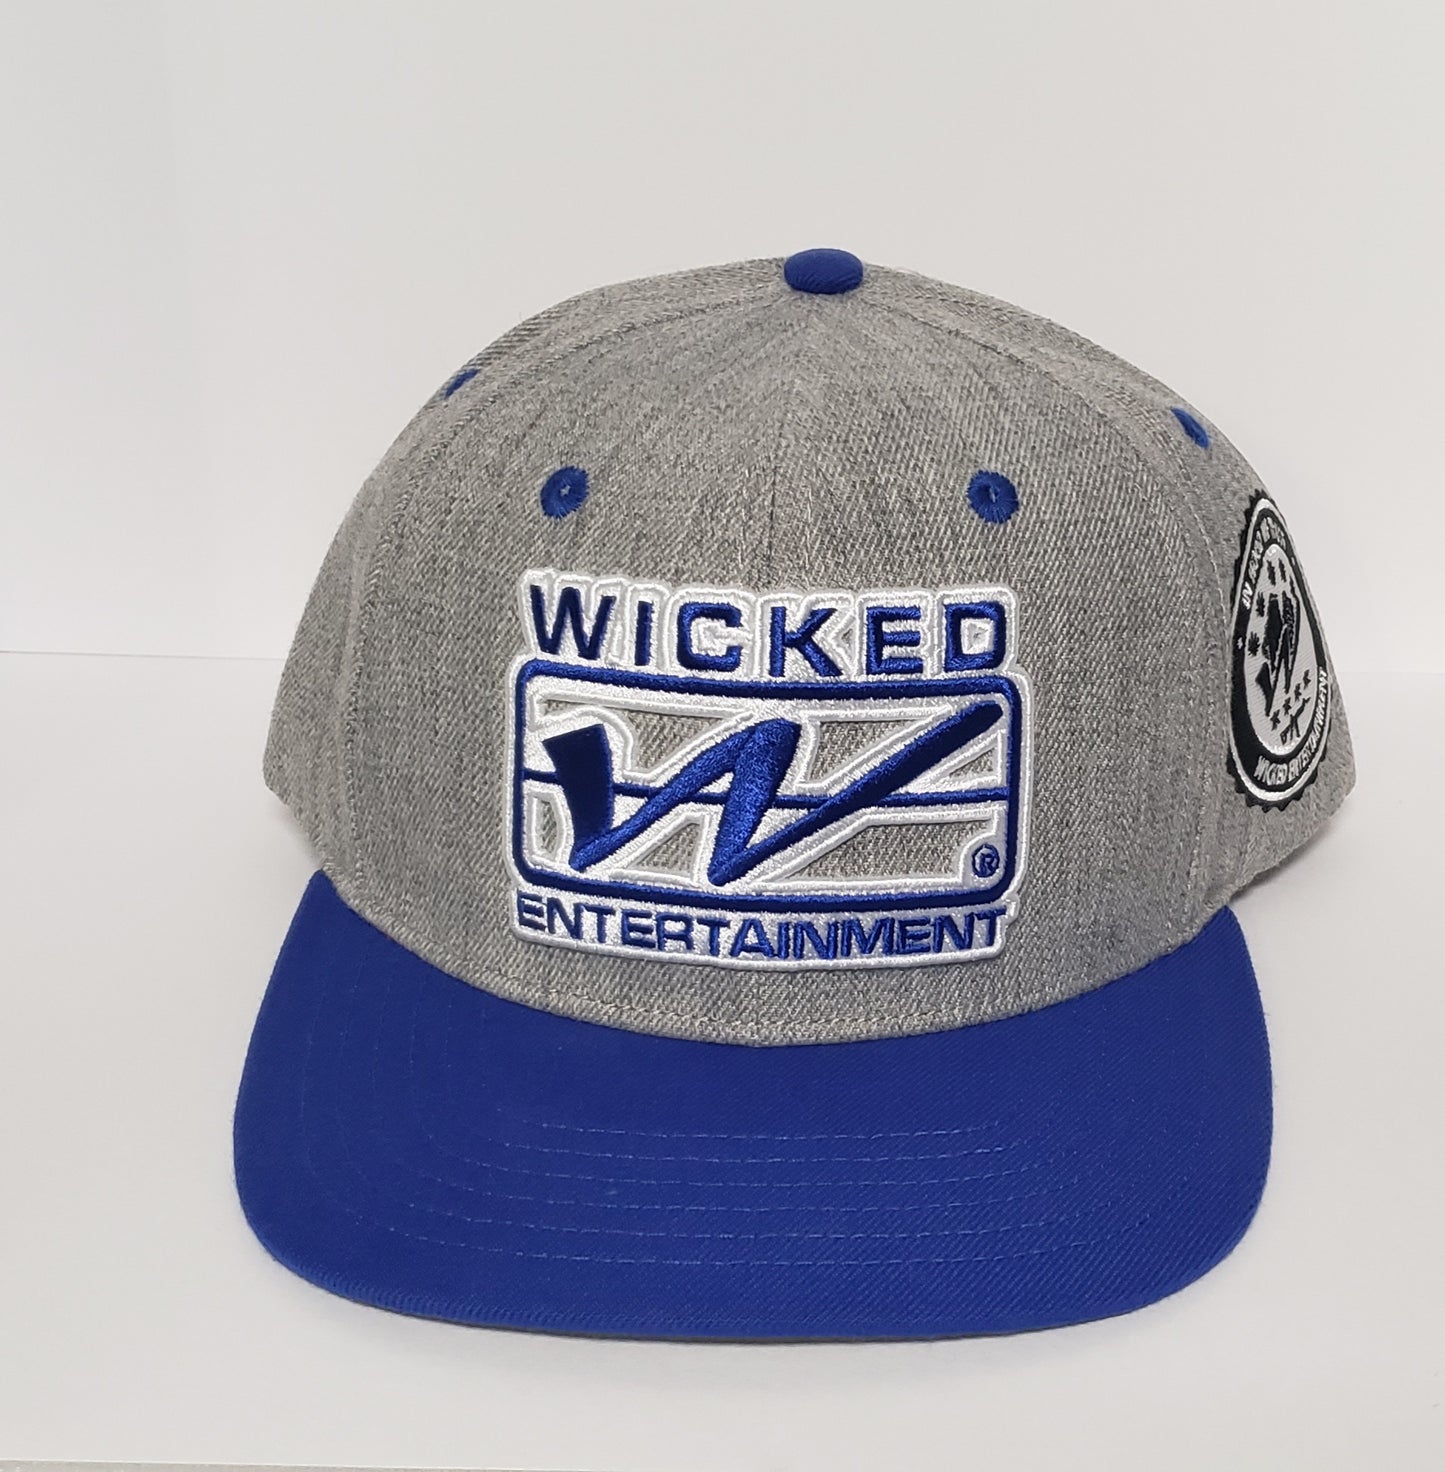 Wicked Logo Snapback hat | Grey and Blue with Blue Brim